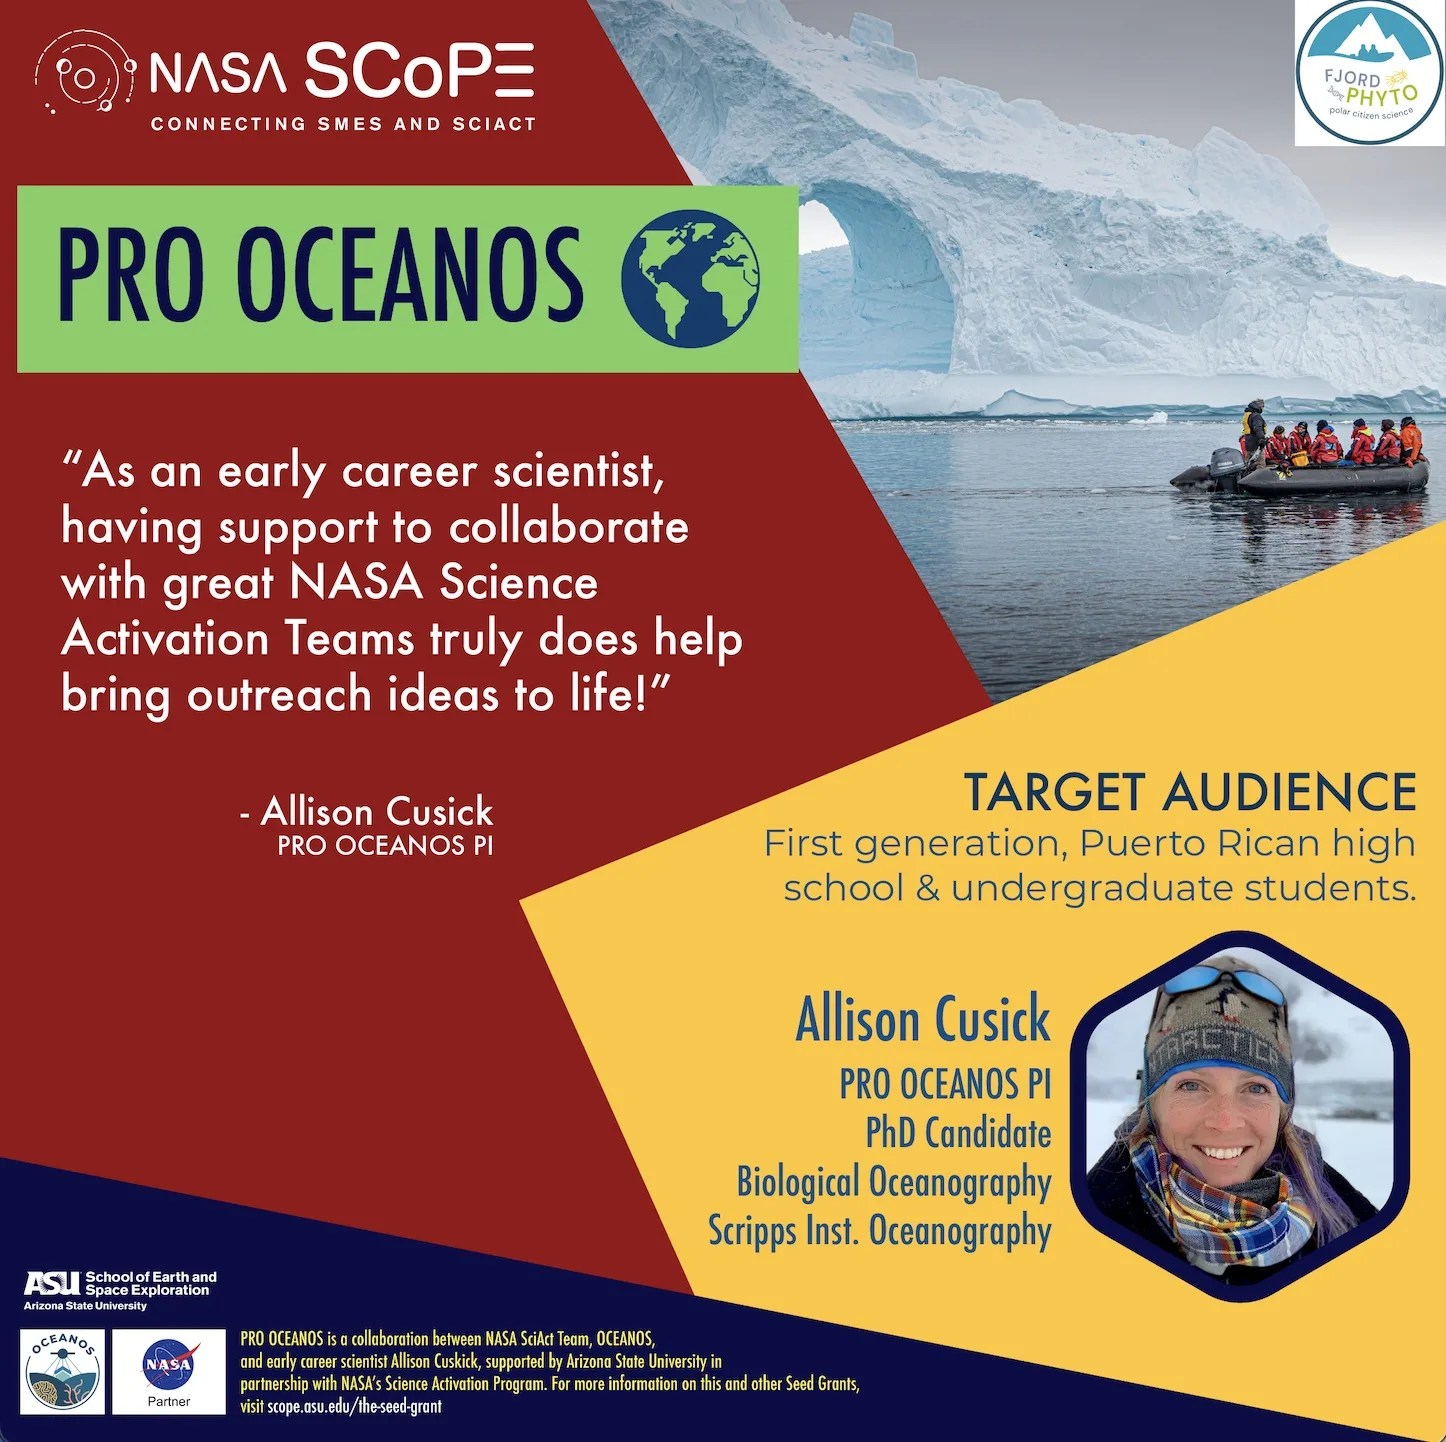 Pro oceanos project infographic with logos, bio photo of Allison Cusick, background photo of Antarctic ice, target audience defined as first generation, Puerto Rican high school and undergraduate students, and quote from Allison